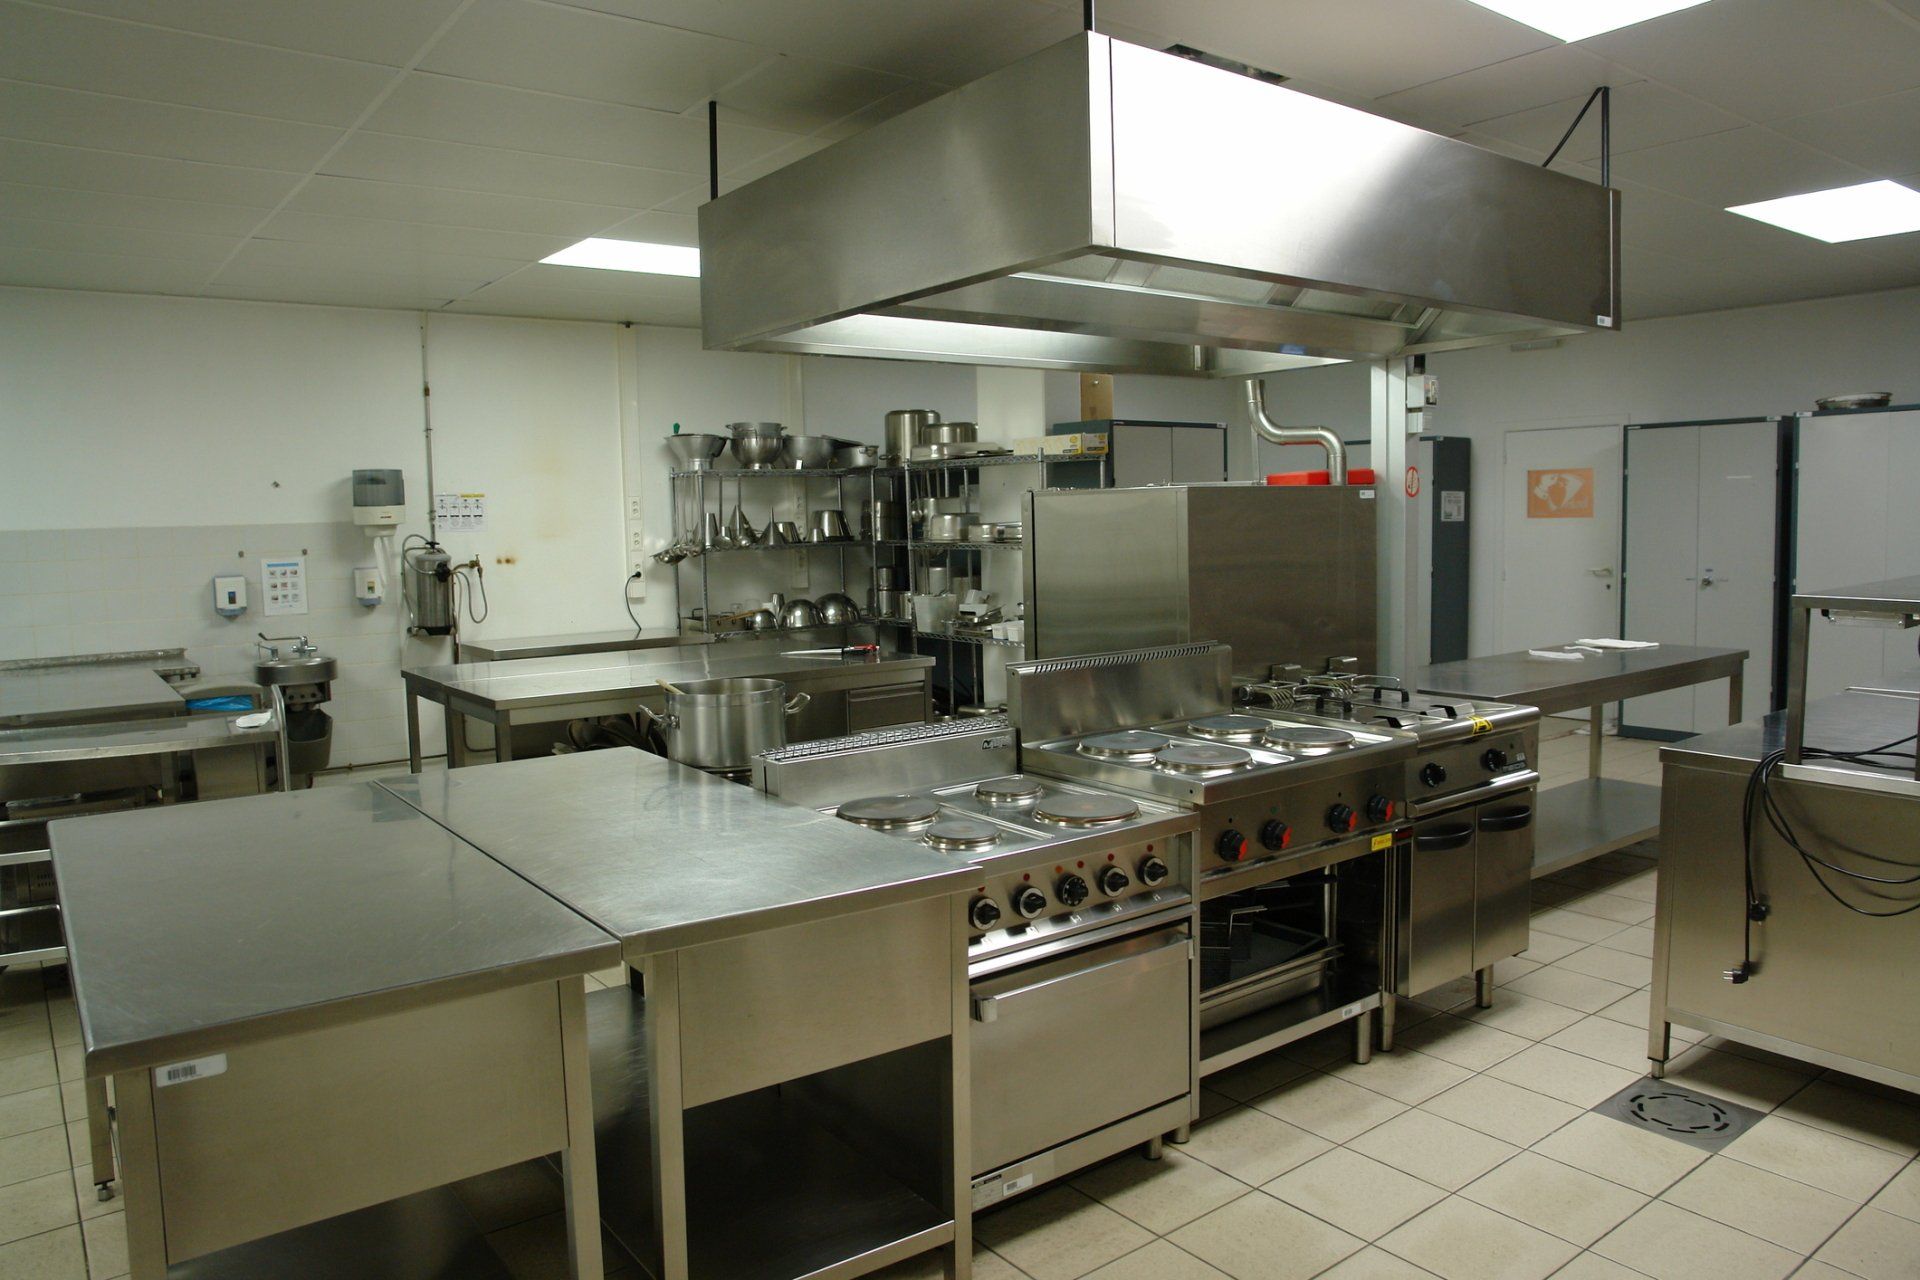 commercial kitchen custom metal work for hood and storage in Tampa restaurant